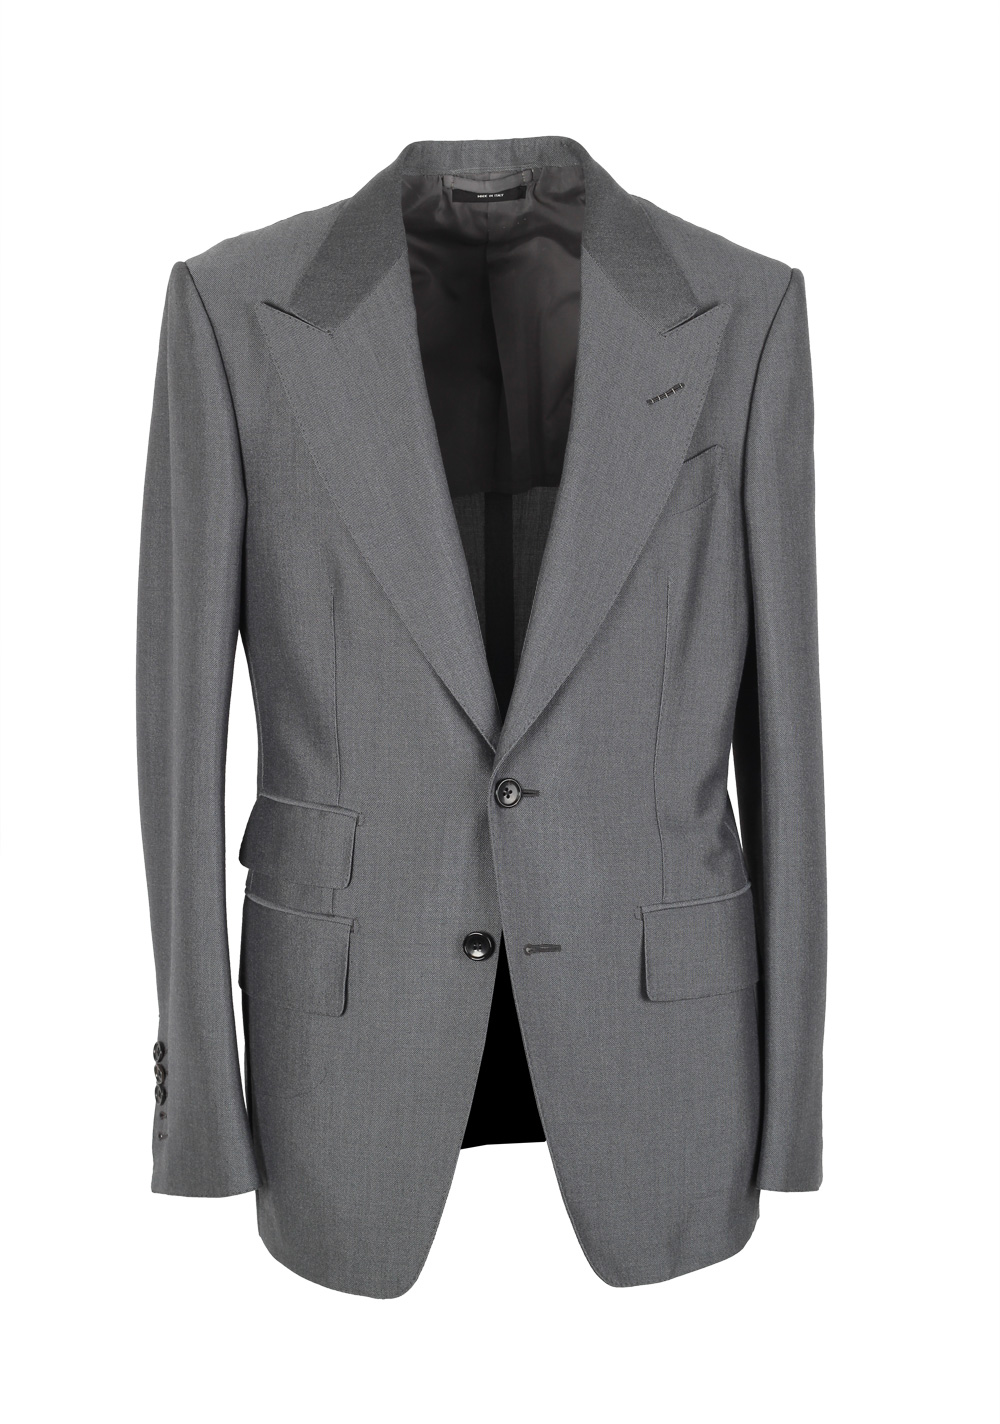 TOM FORD Shelton Gray Suit Size 46 / 36R U.S. In Mohair Wool | Costume ...